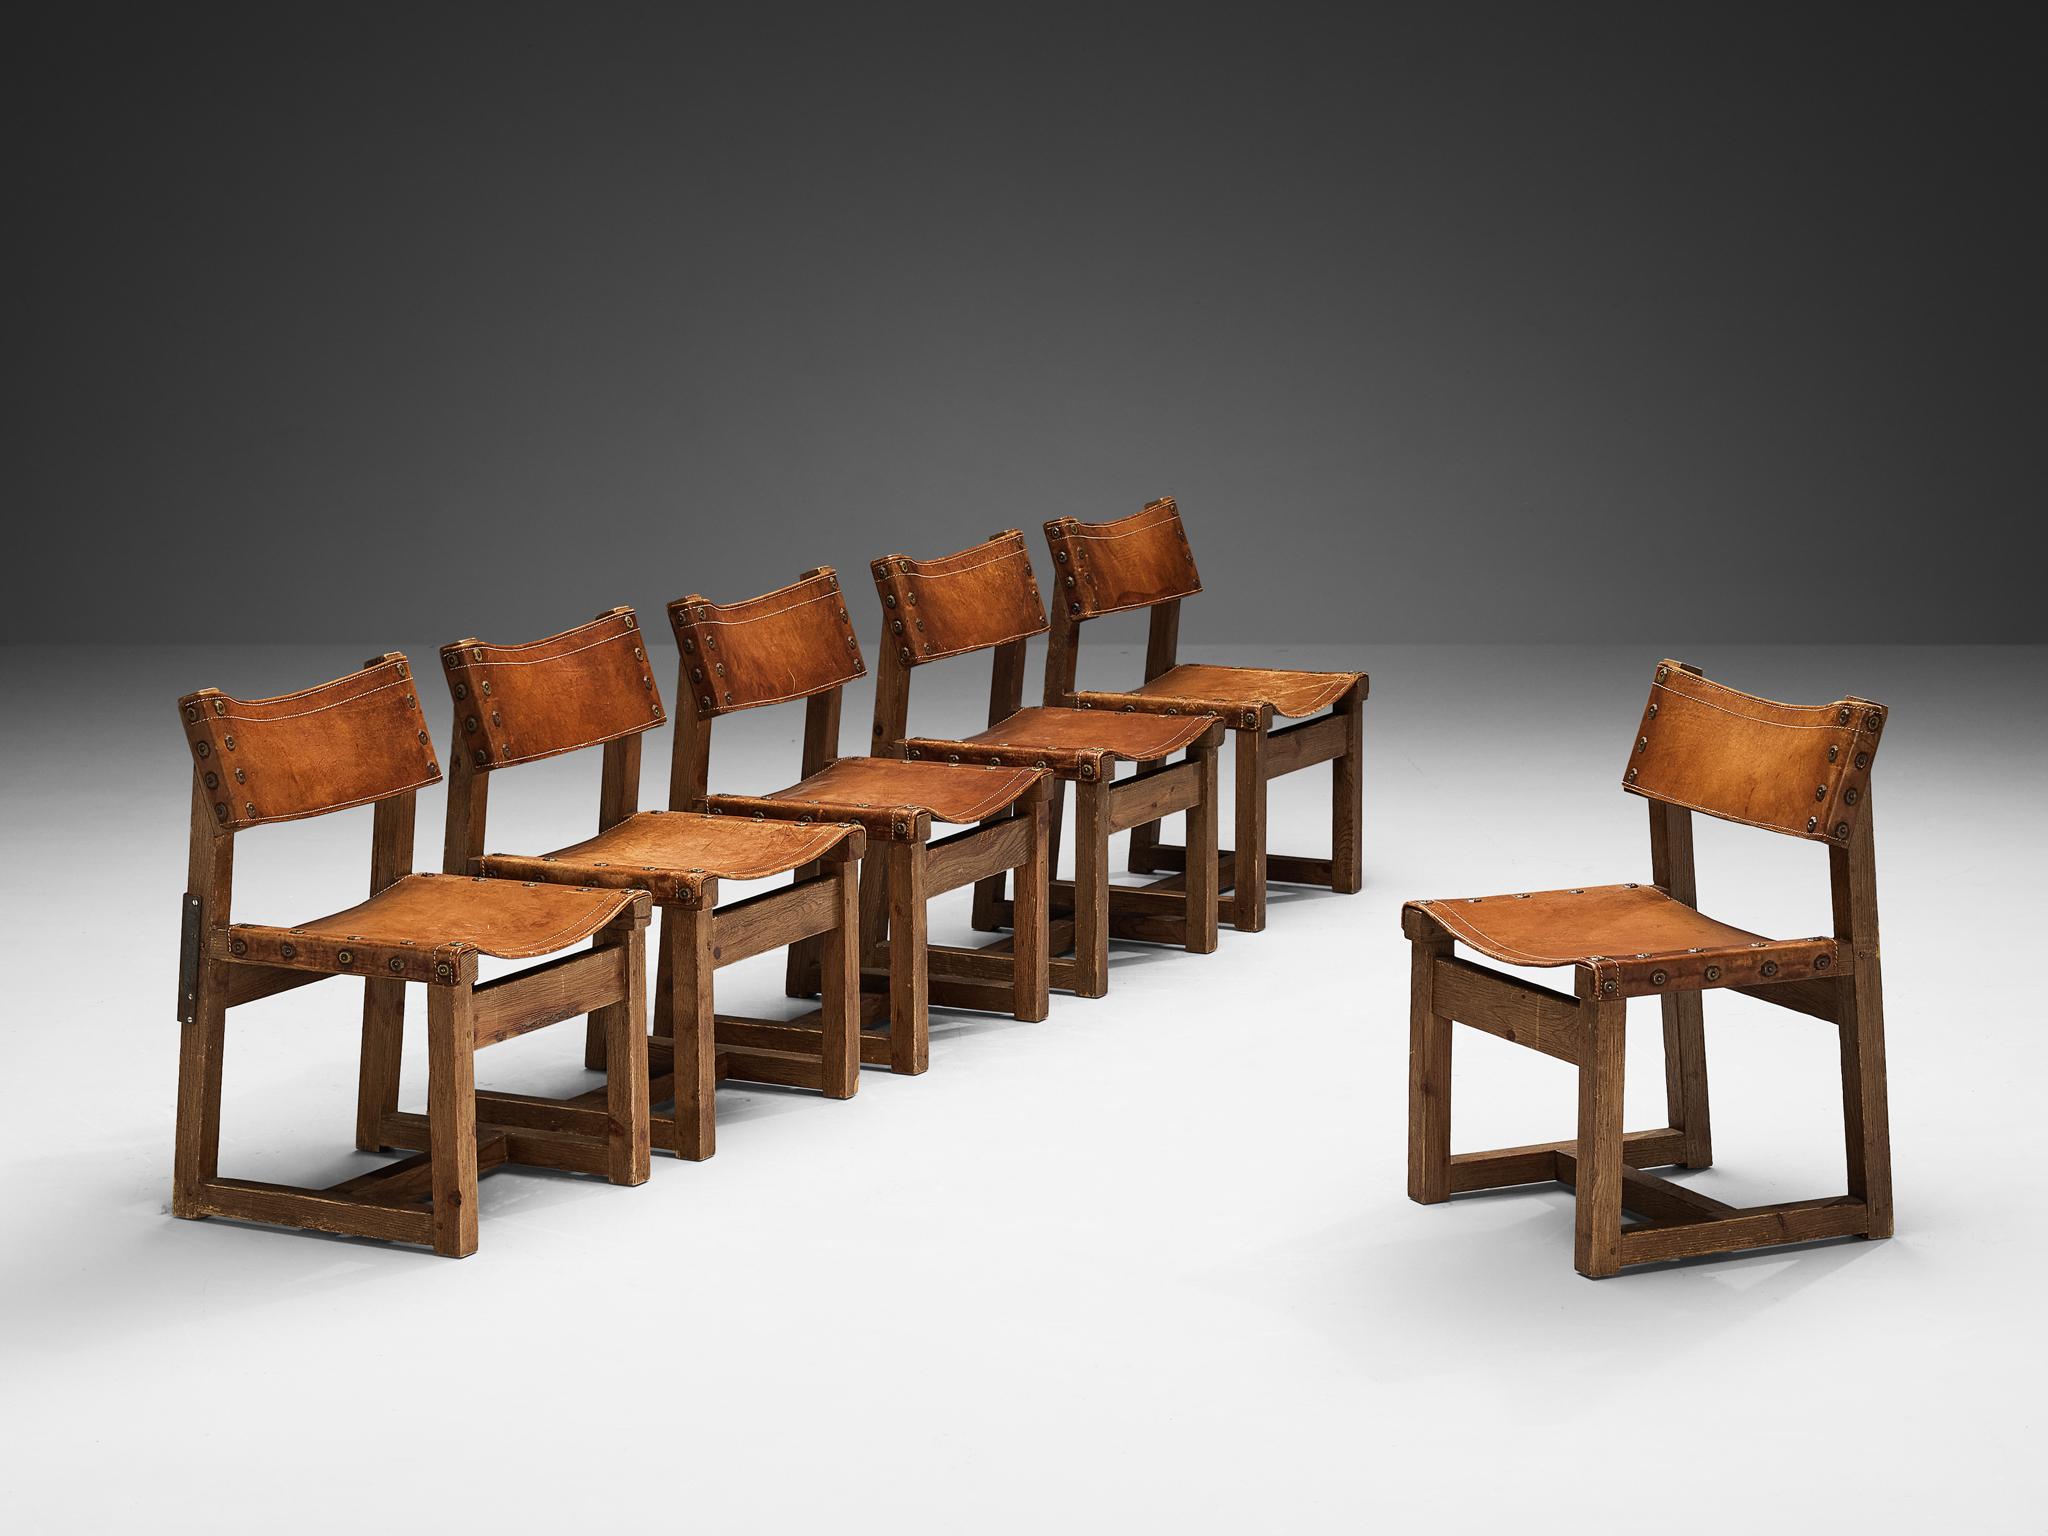 Biosca, set of six chairs, leather, oak, brass, Spain, 1960s 

Sturdy chairs manufactured by the Spanish Biosca. These chairs are made from oak and have cognac leather seatings. The chairs have a robust look, which is emphasized by decorative brass